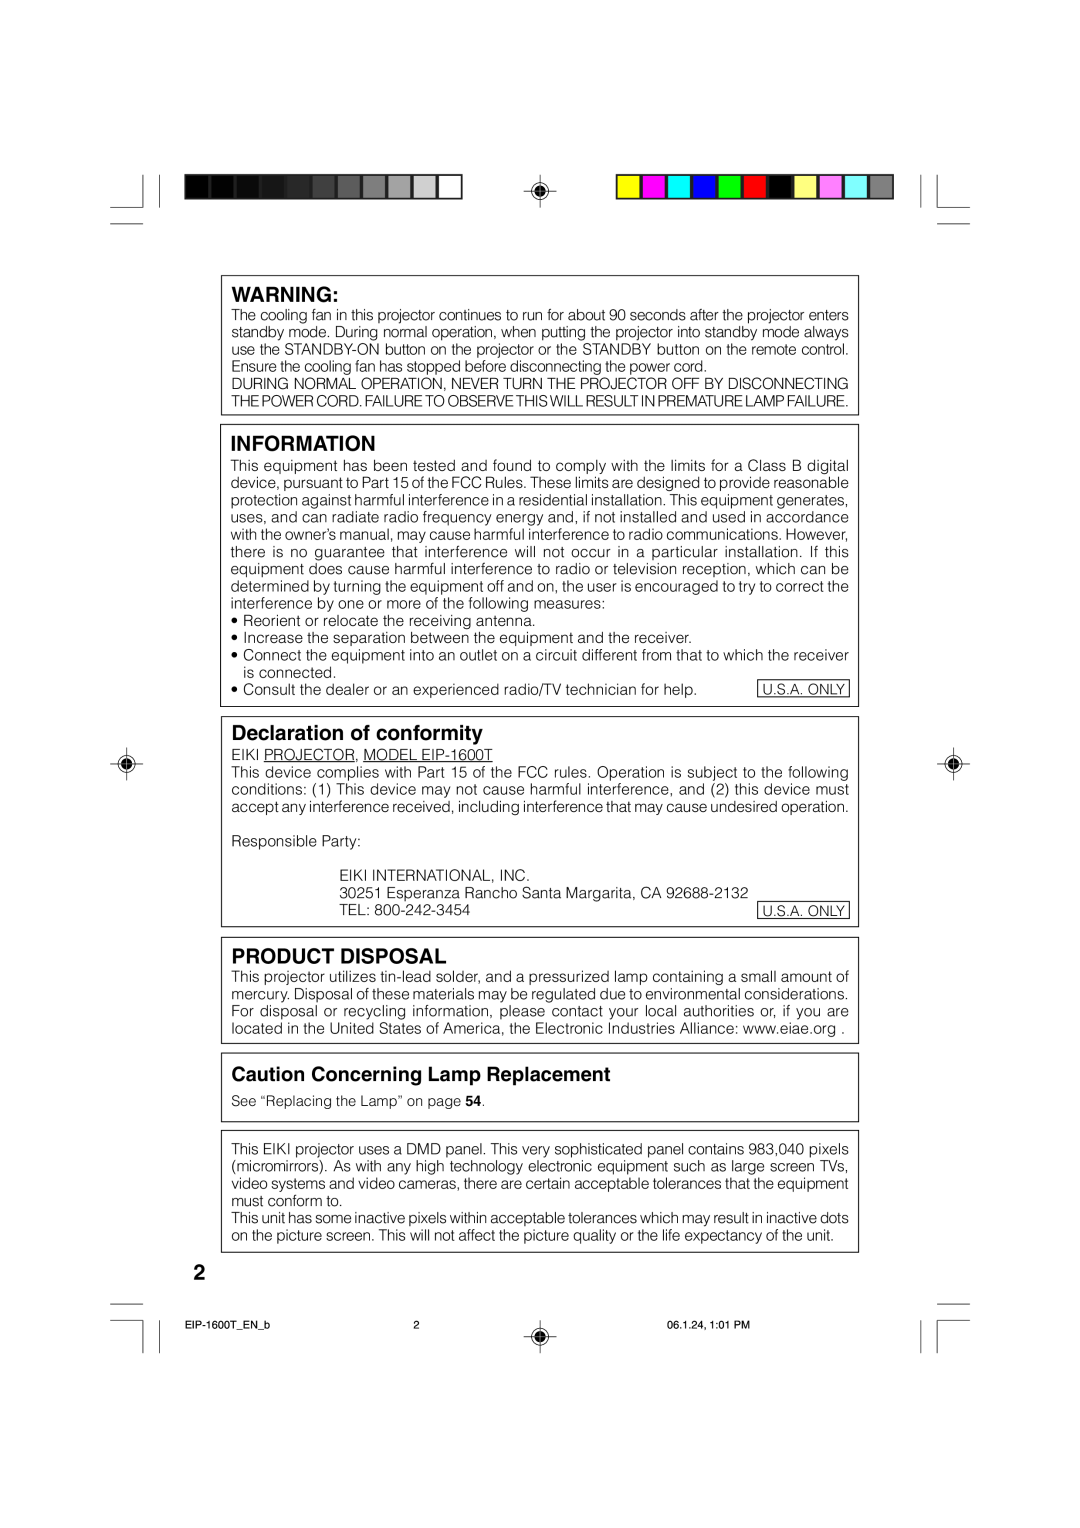 Eiki EIP-1600T owner manual Information, Declaration of conformity, Product Disposal, Caution Concerning Lamp Replacement 